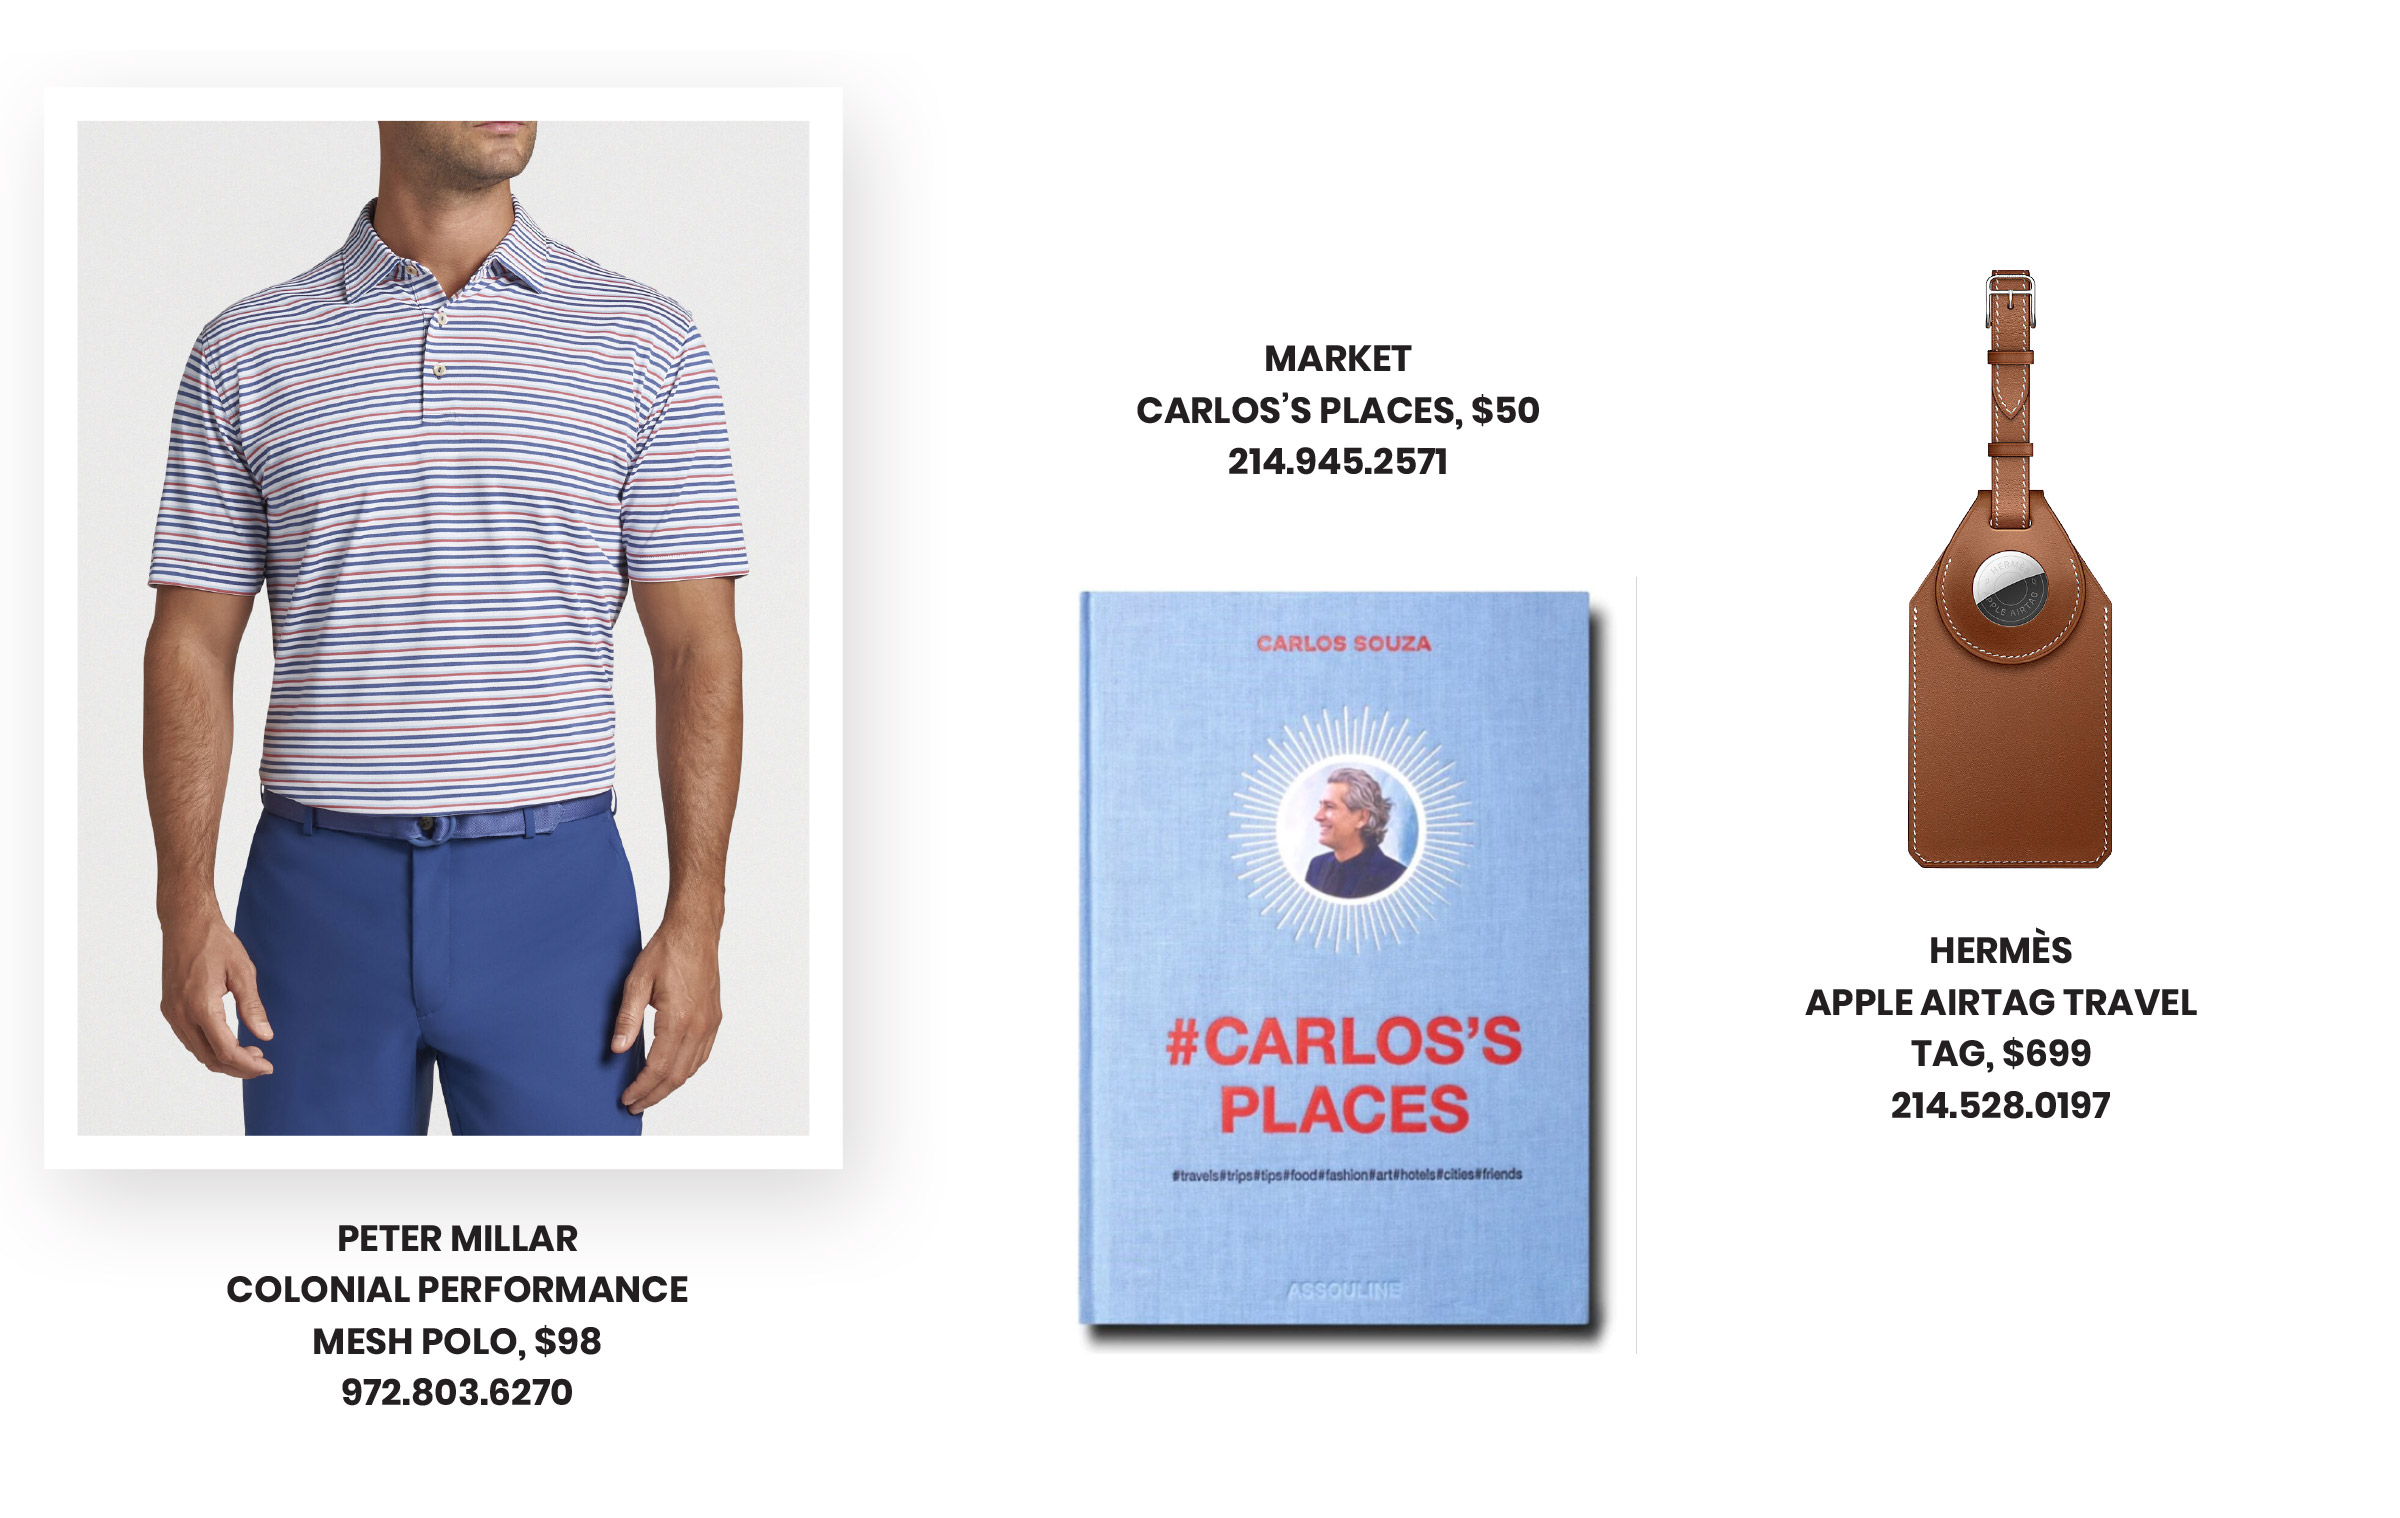 Father’s Day Gifts featuring Peter Millar golf polo, Market coffee table book, and Hermes Apple Airtag tag